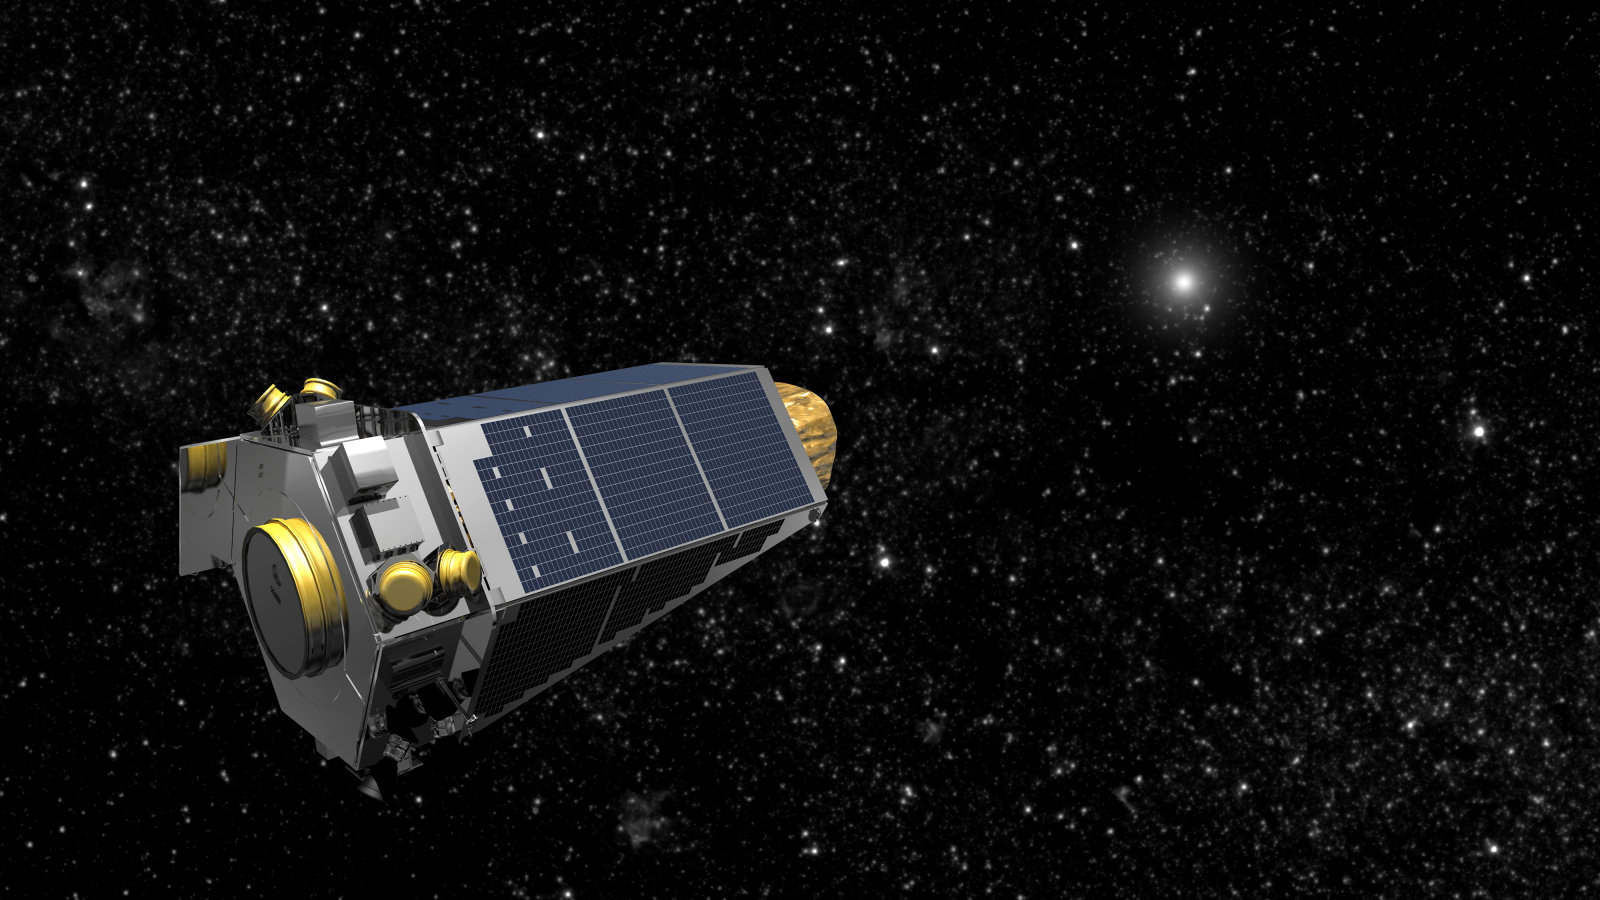 NASA's Kepler spacecraft is seen in an undated artist's rendering. During a scheduled contact on Thursday, April 7, 2016, mission operations engineers discovered that the Kepler spacecraft was in Emergency Mode and the mission has declared a spacecraft emergency. The spacecraft is nearly 75 million miles from Earth. REUTERS/NASA/Handout via Reuters  THIS IMAGE HAS BEEN SUPPLIED BY A THIRD PARTY. IT IS DISTRIBUTED, EXACTLY AS RECEIVED BY REUTERS, AS A SERVICE TO CLIENTS. FOR EDITORIAL USE ONLY. NOT FOR SALE FOR MARKETING OR ADVERTISING CAMPAIGNS